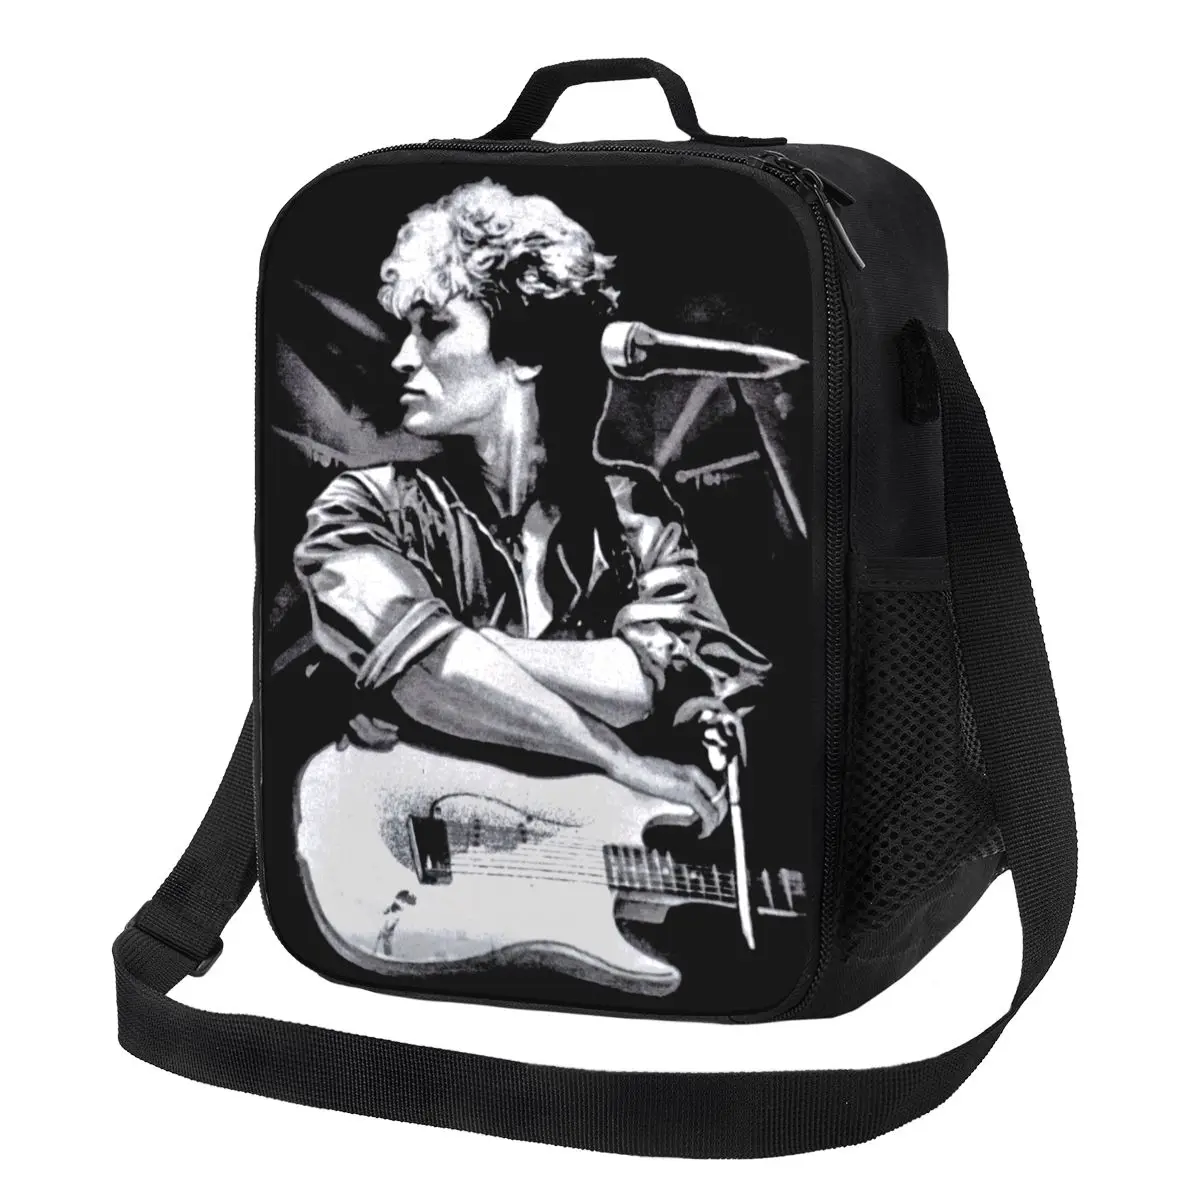 Viktor Tsoi Guitar Portable Lunch Boxes for Women Rusian Rock Kino Thermal Cooler Food Insulated Lunch Bag Kids School Children